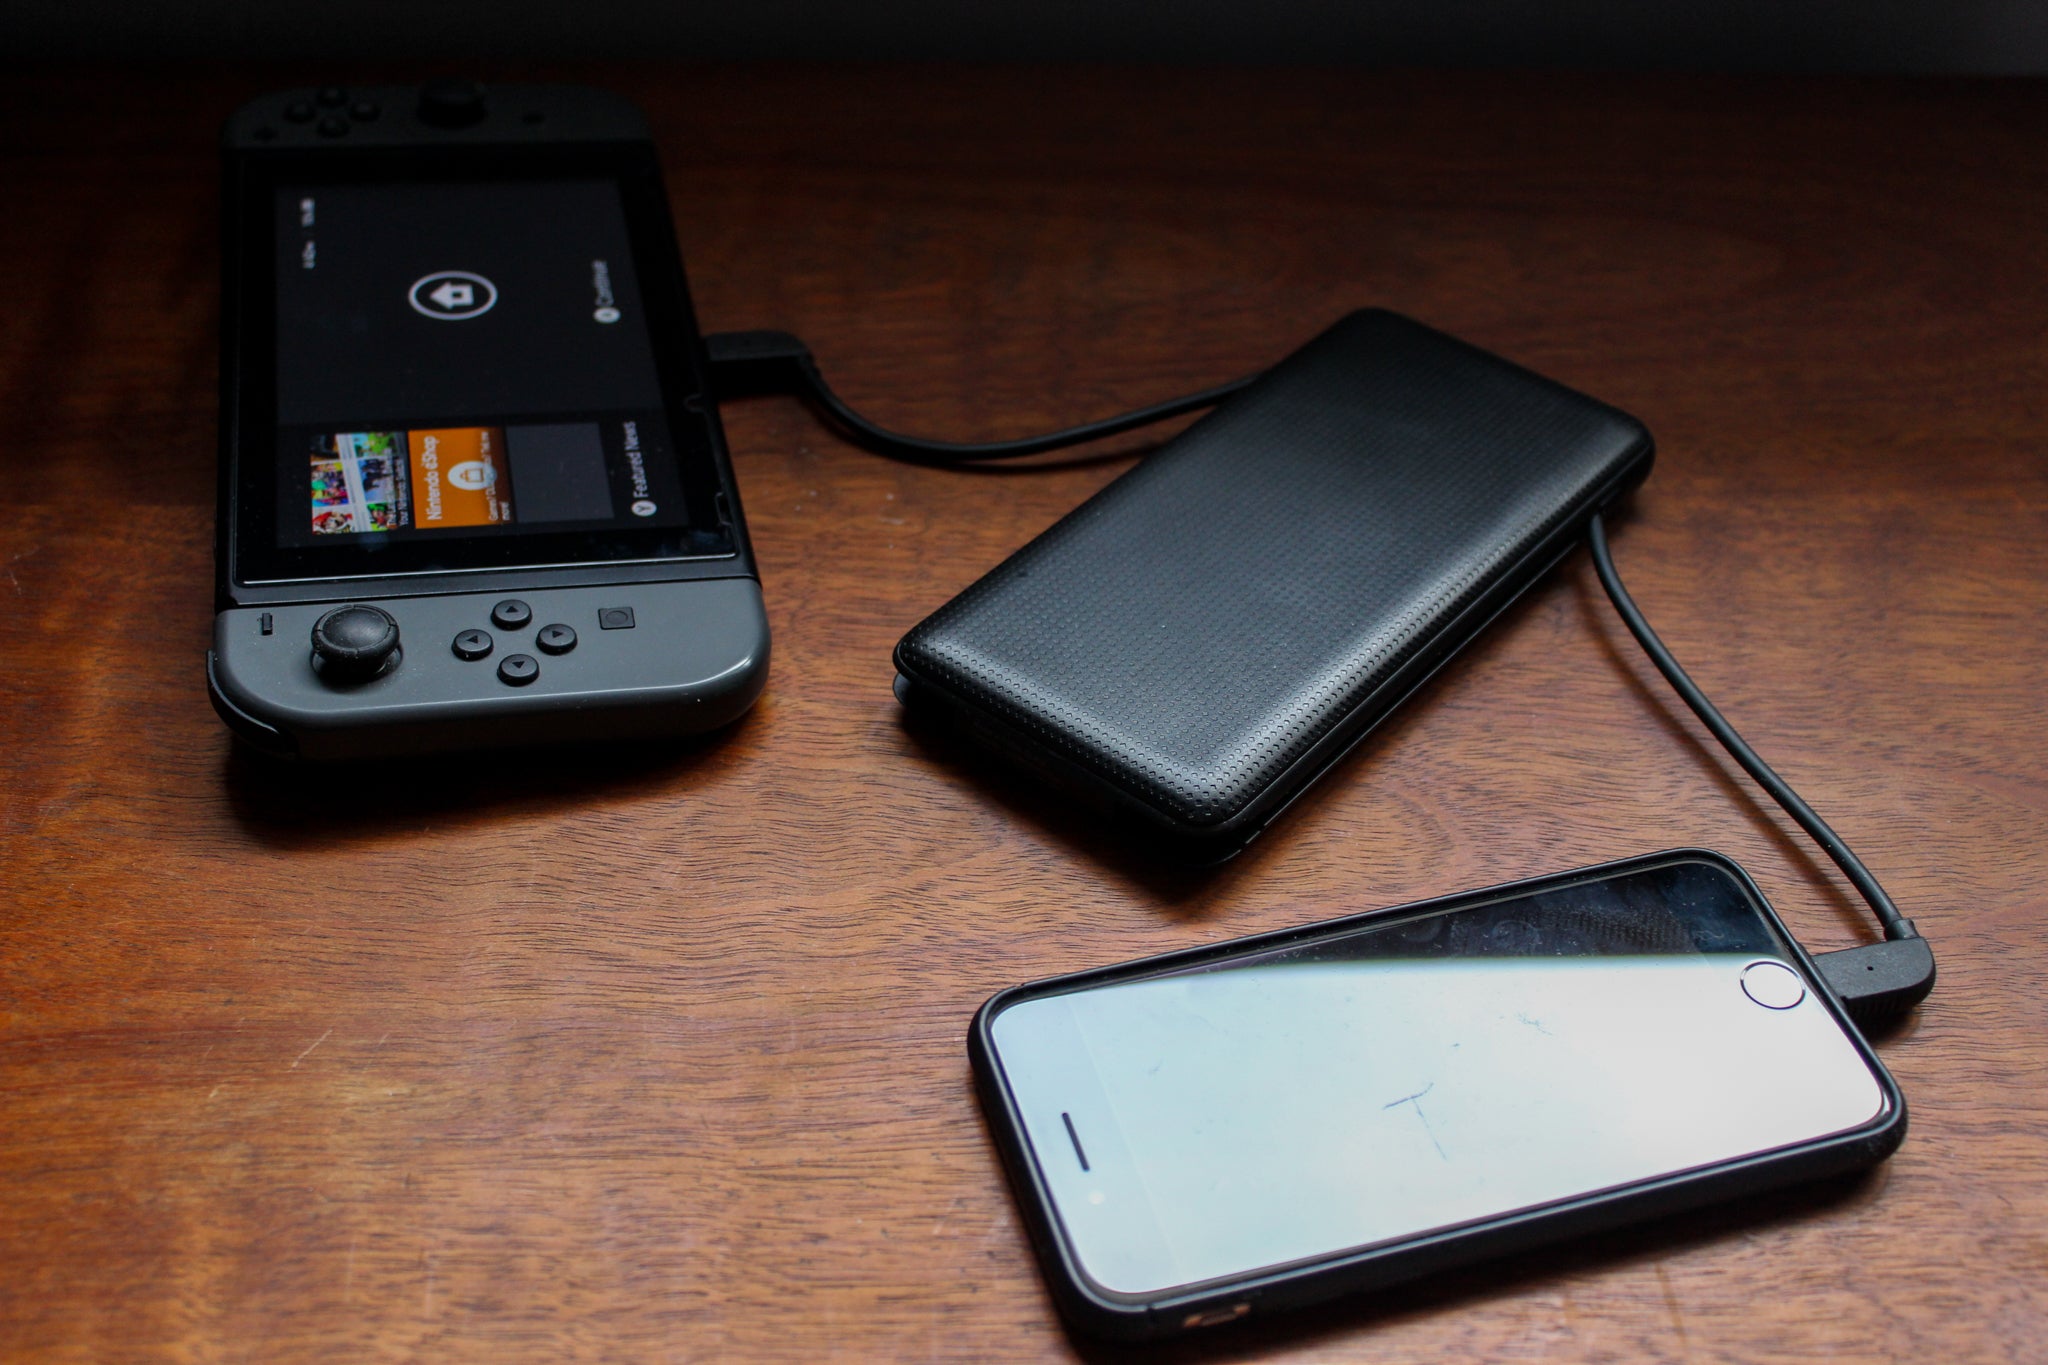 A power bank in the midst of being tested, plugged into a smart phone and a video game to charge both simultaneously.